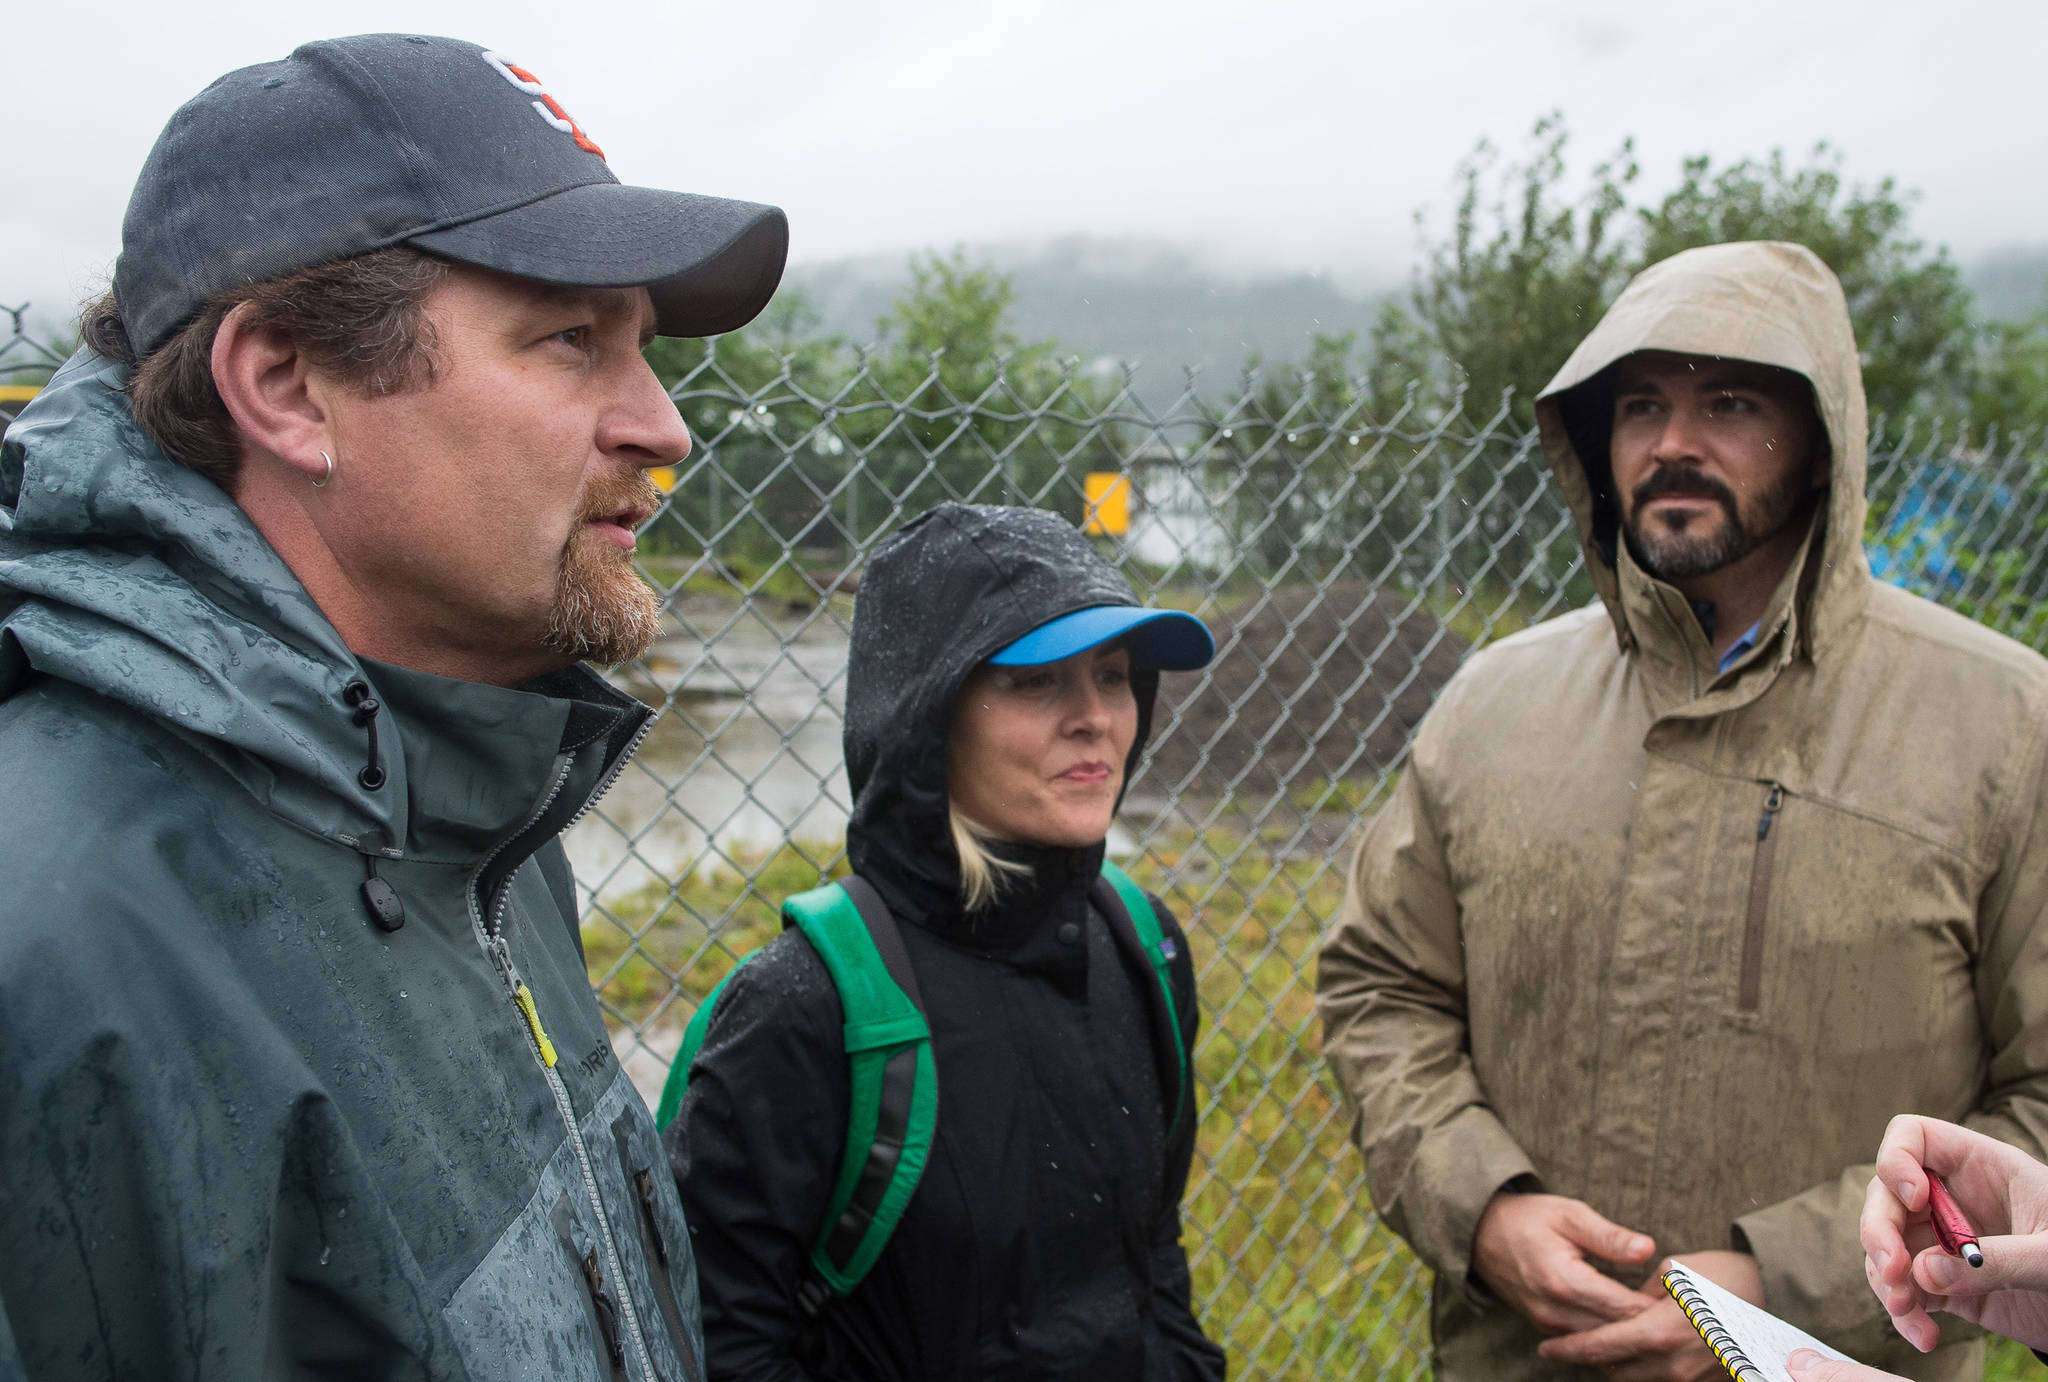 Alaska Mental Health Trust Authority Chief Operating Officer Steve Williams, left, Chief Communications Officer Carley Lawrence, center, and Executive Director John Morrison watch as Juneau Police Department Officers serve eviction notices on homeless encampments on Tuesday, Aug. 22, 2017. (Michael Penn | Juneau Empire)